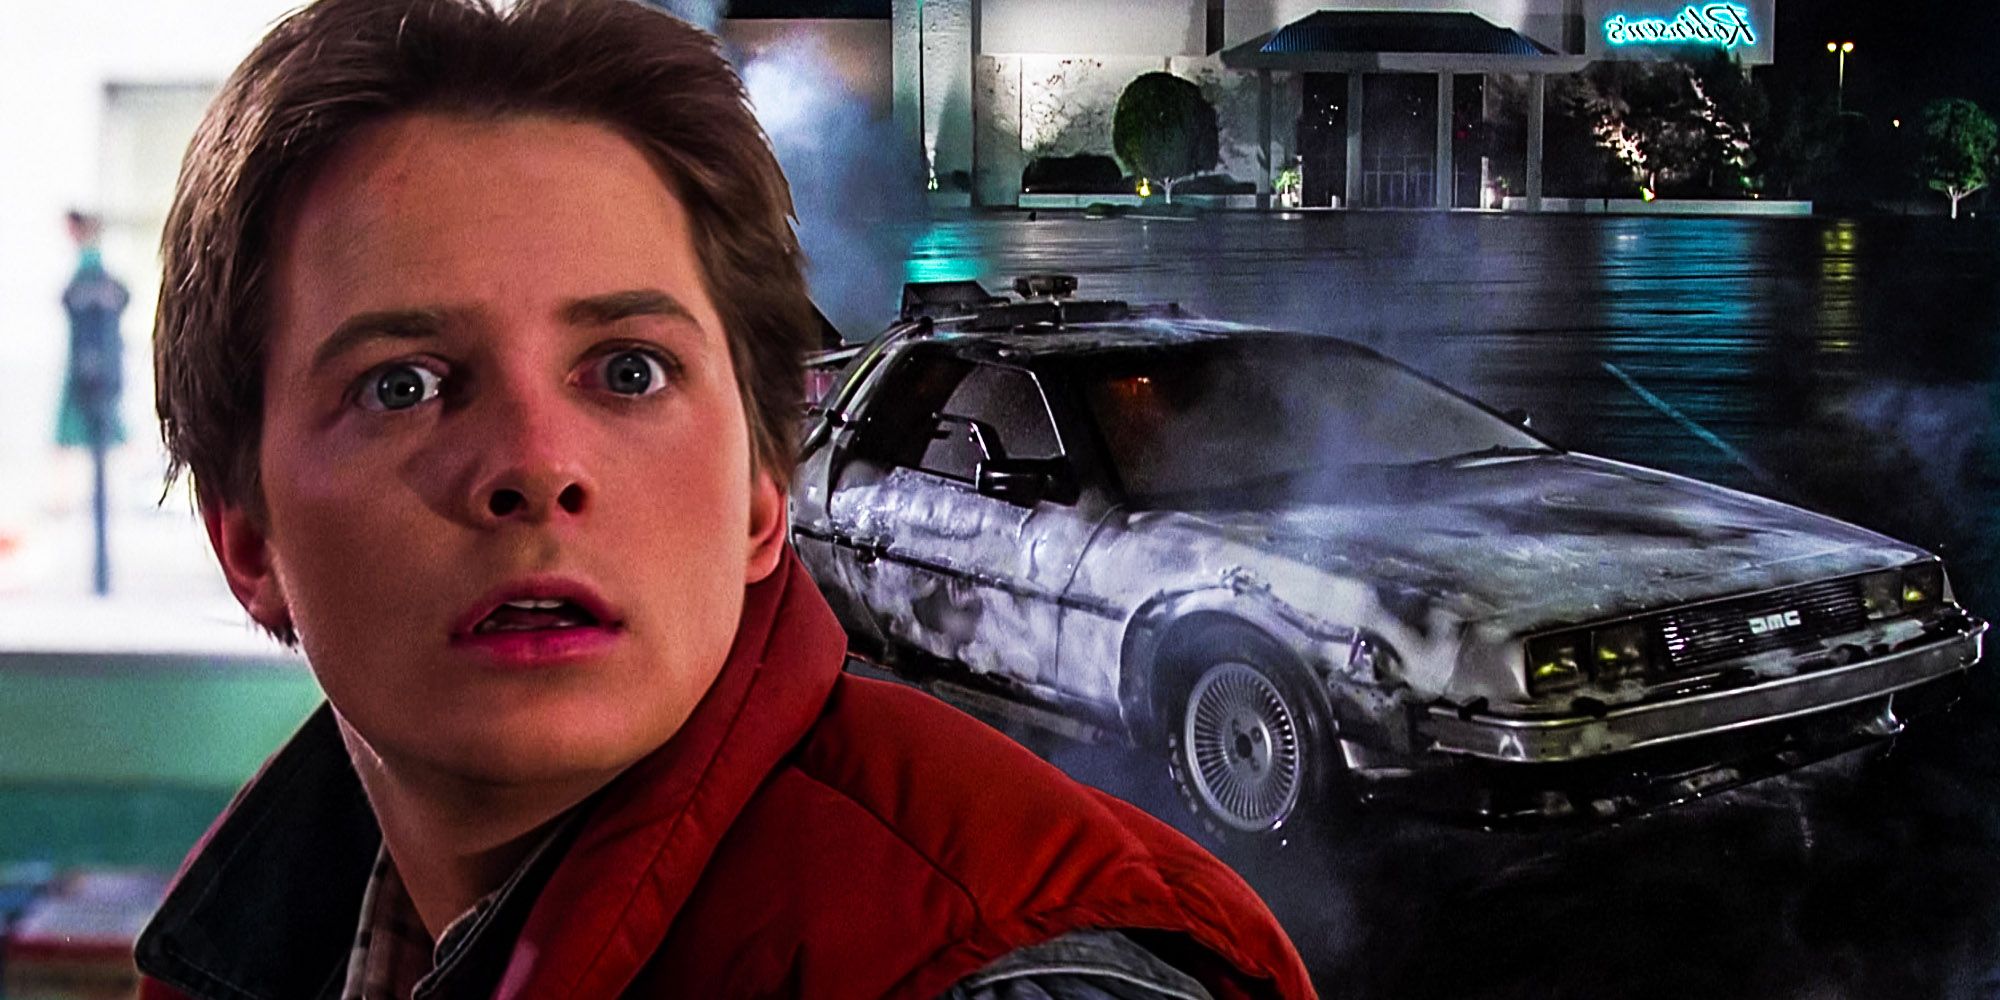 How a drug bust landed the DeLorean in 'Back to the Future